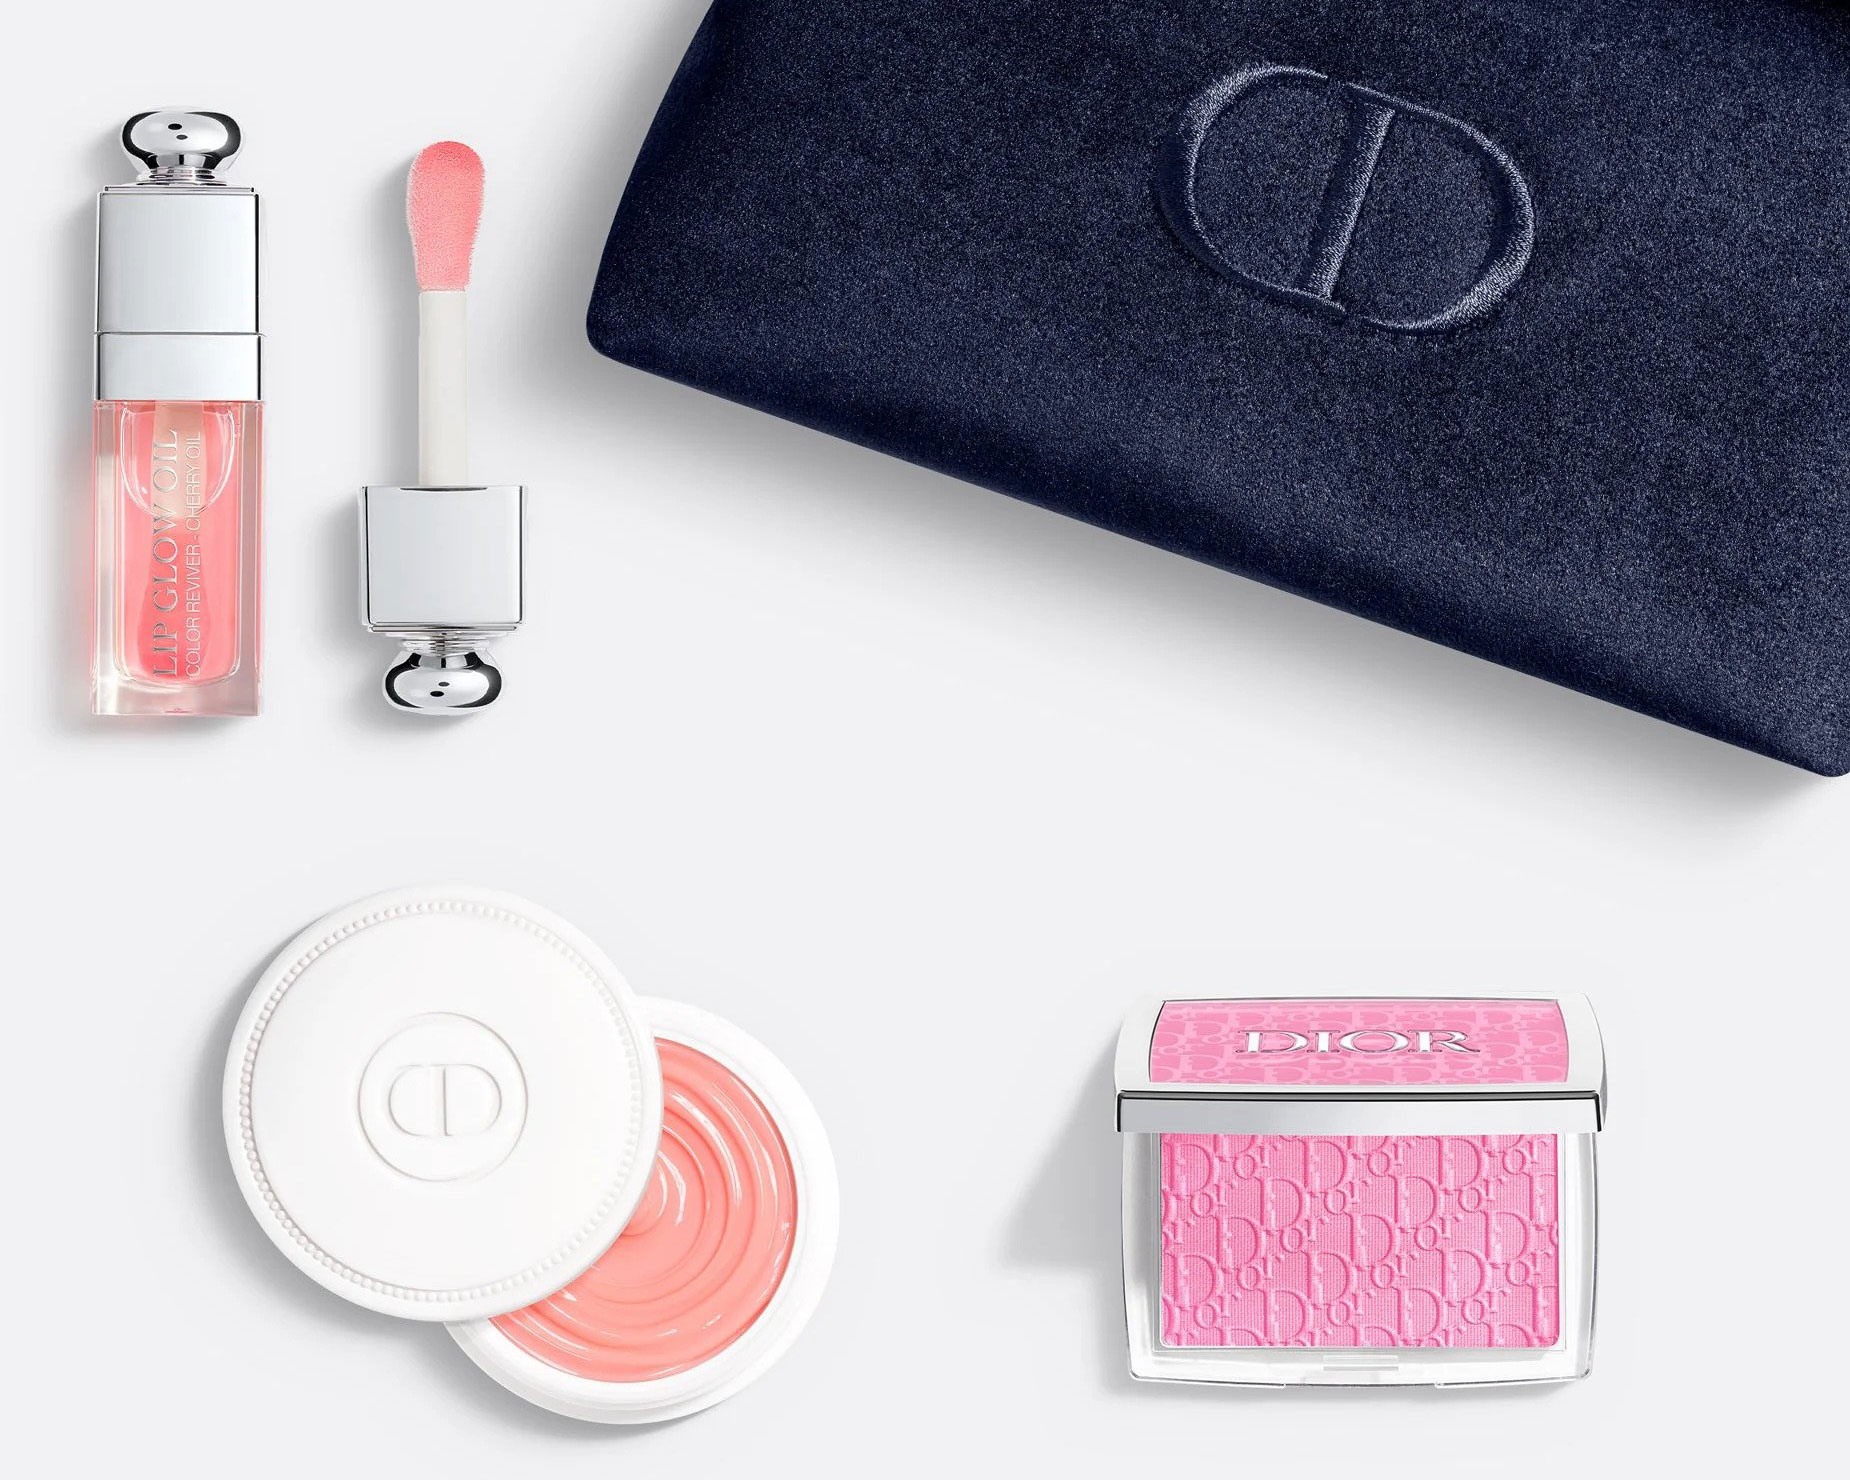 beauty gifts - dior the natural glow set